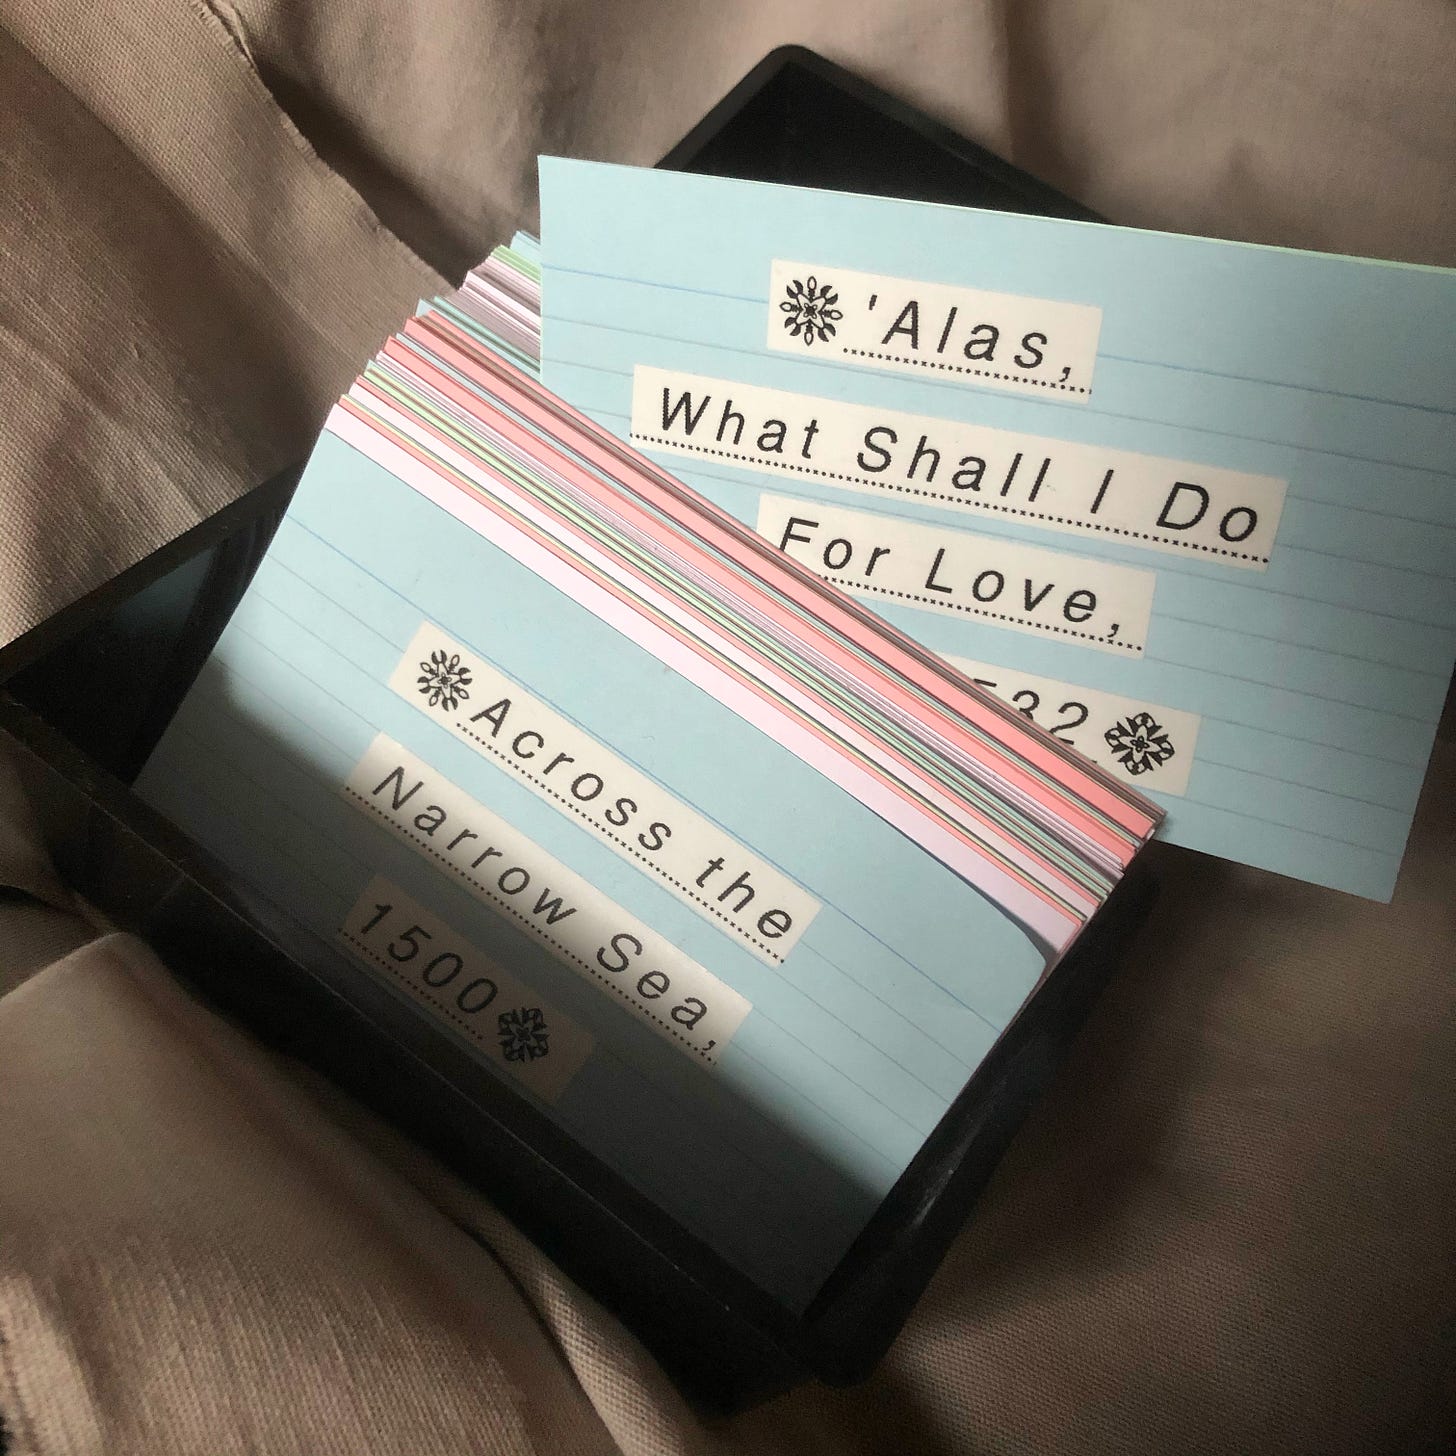 A black box of index cards, two are visible and read “Across the Narrow Sea, 1500” and “Alas, What Shall I Do For Love”